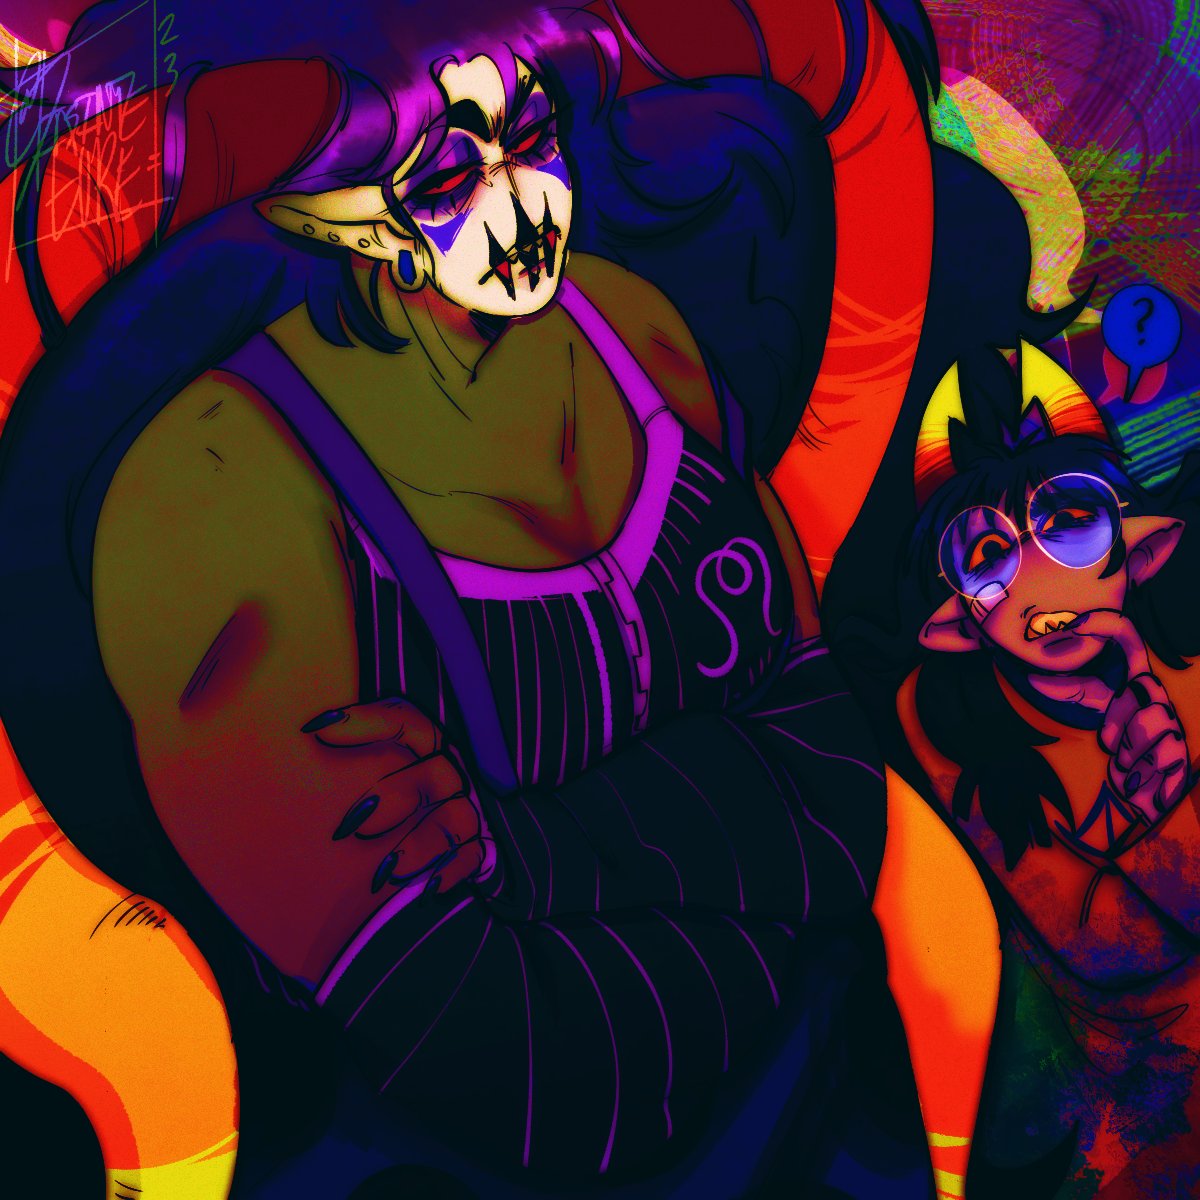 homestuck cw, eyestrain cw//

first drawing of the year. 
#hiveswap #home22tuck